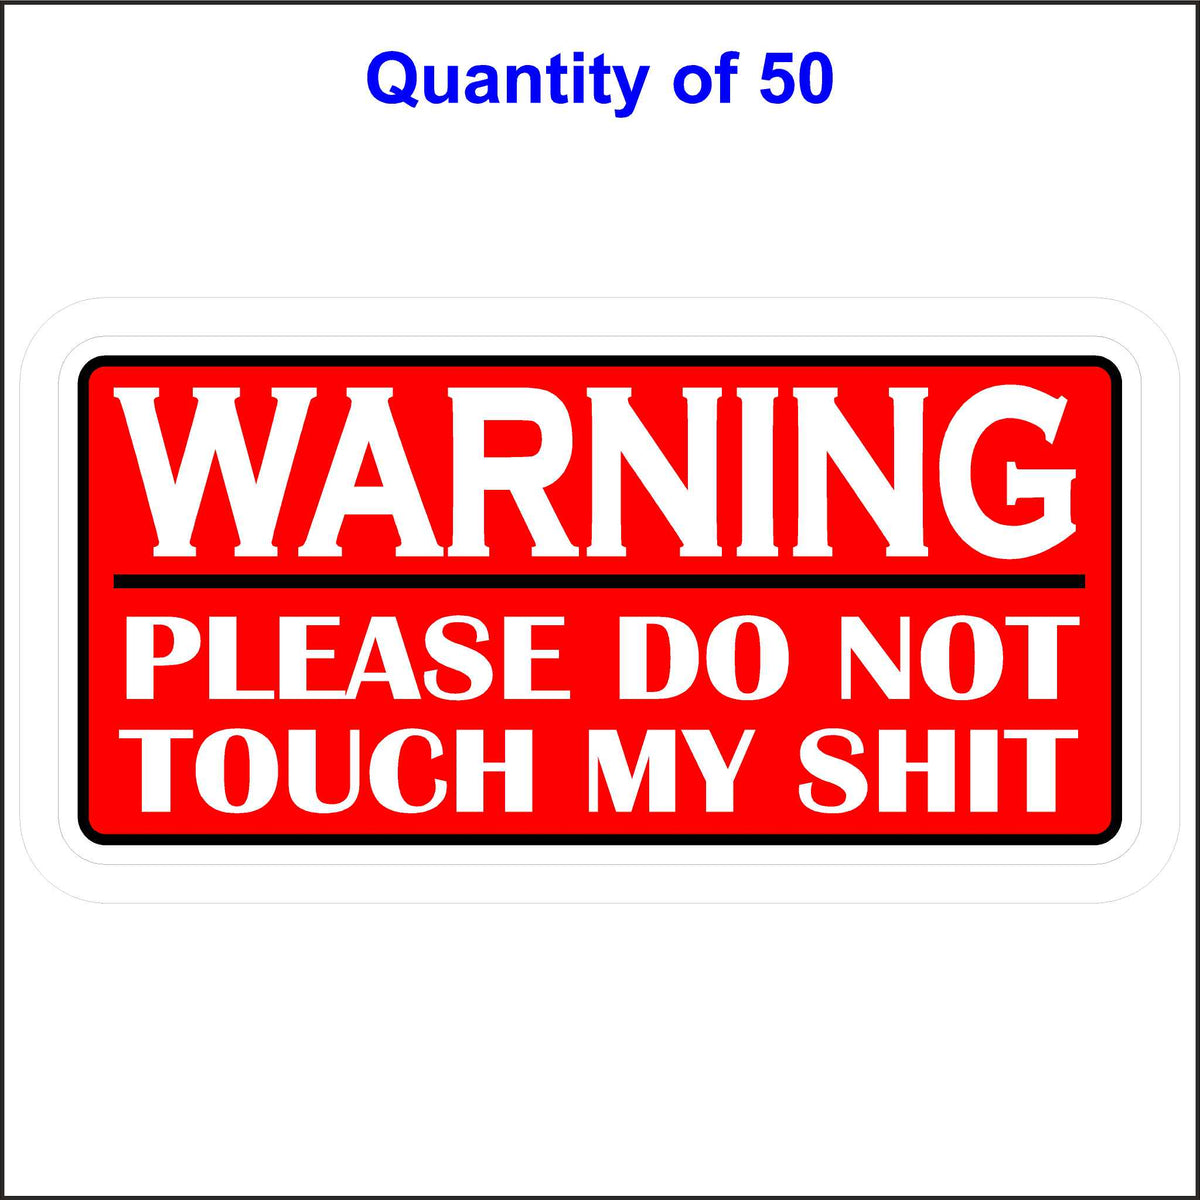 Warning Please Do Not Touch My Shit Sticker With a Red Background and White Lettering. 50 Quantity.